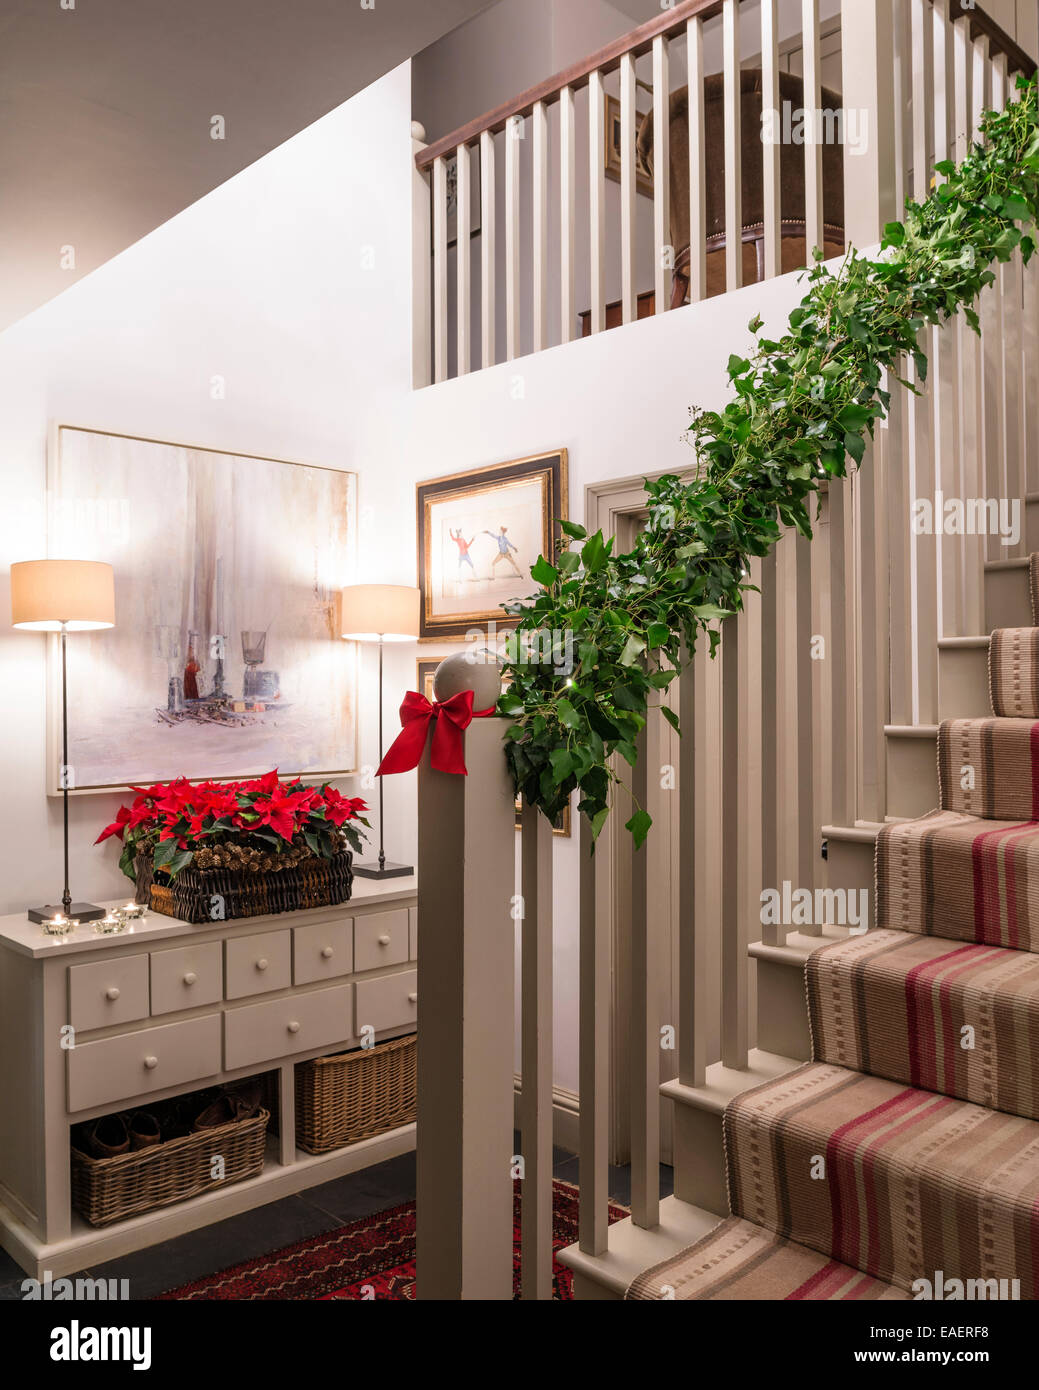 Ivy wrapped around stair banister and tray of poinsettas adds a festive seasonal touch to a hallway Stock Photo